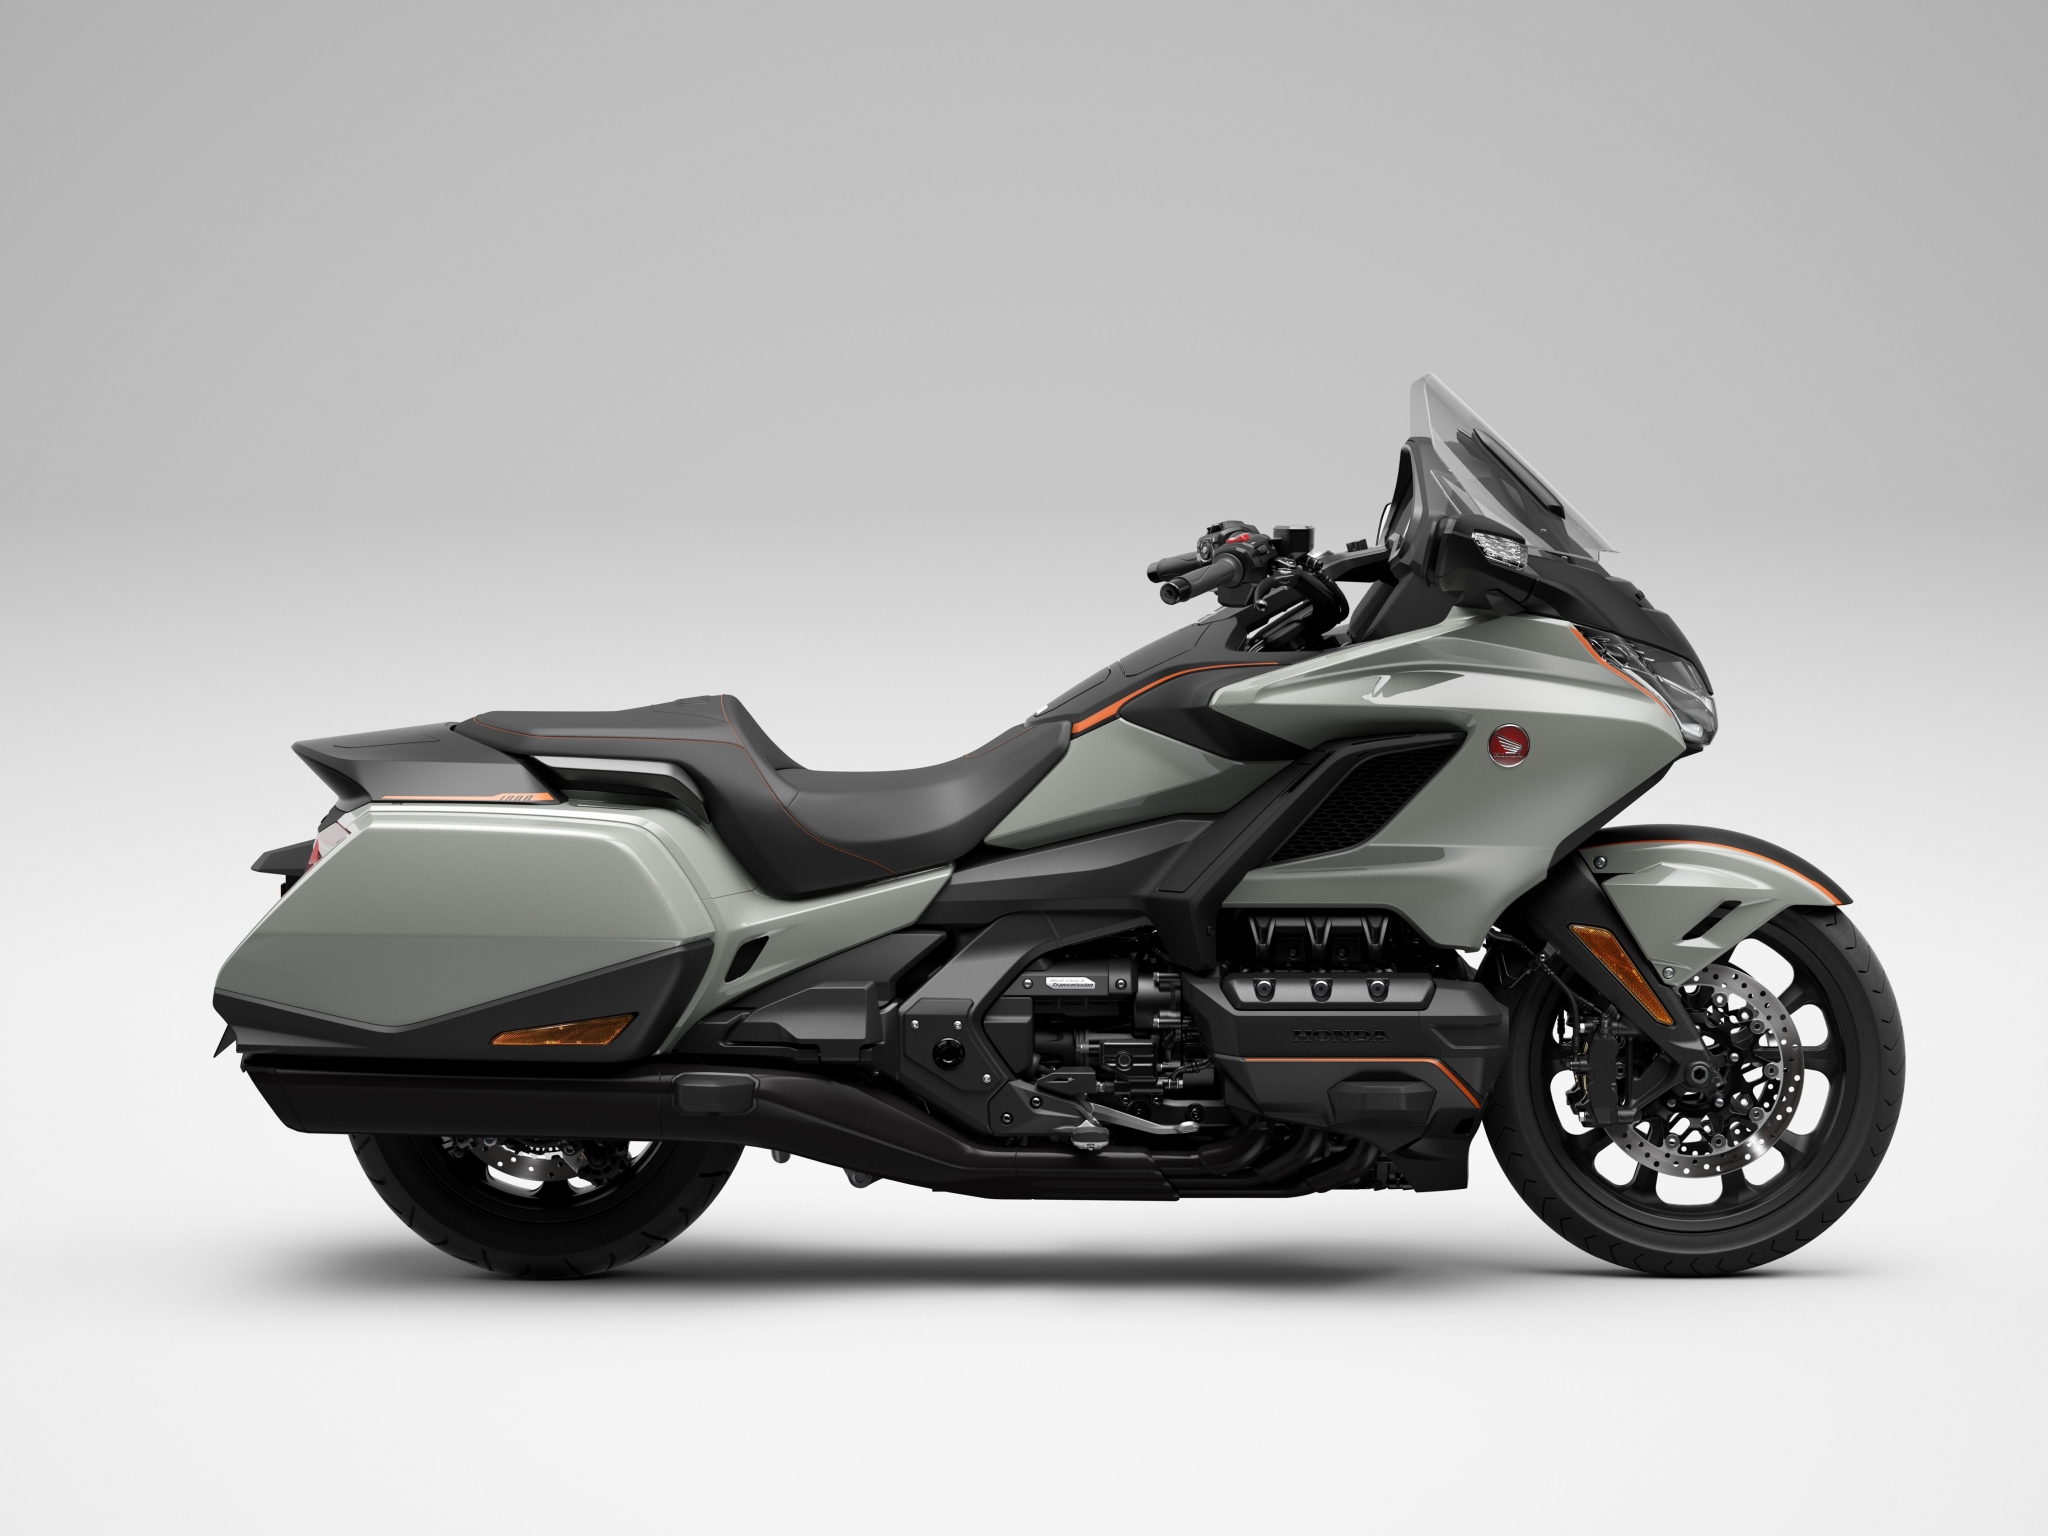 2021 Honda Gl1800 - 2021 Honda Gold Wing and Gold Wing Tour First Look ...